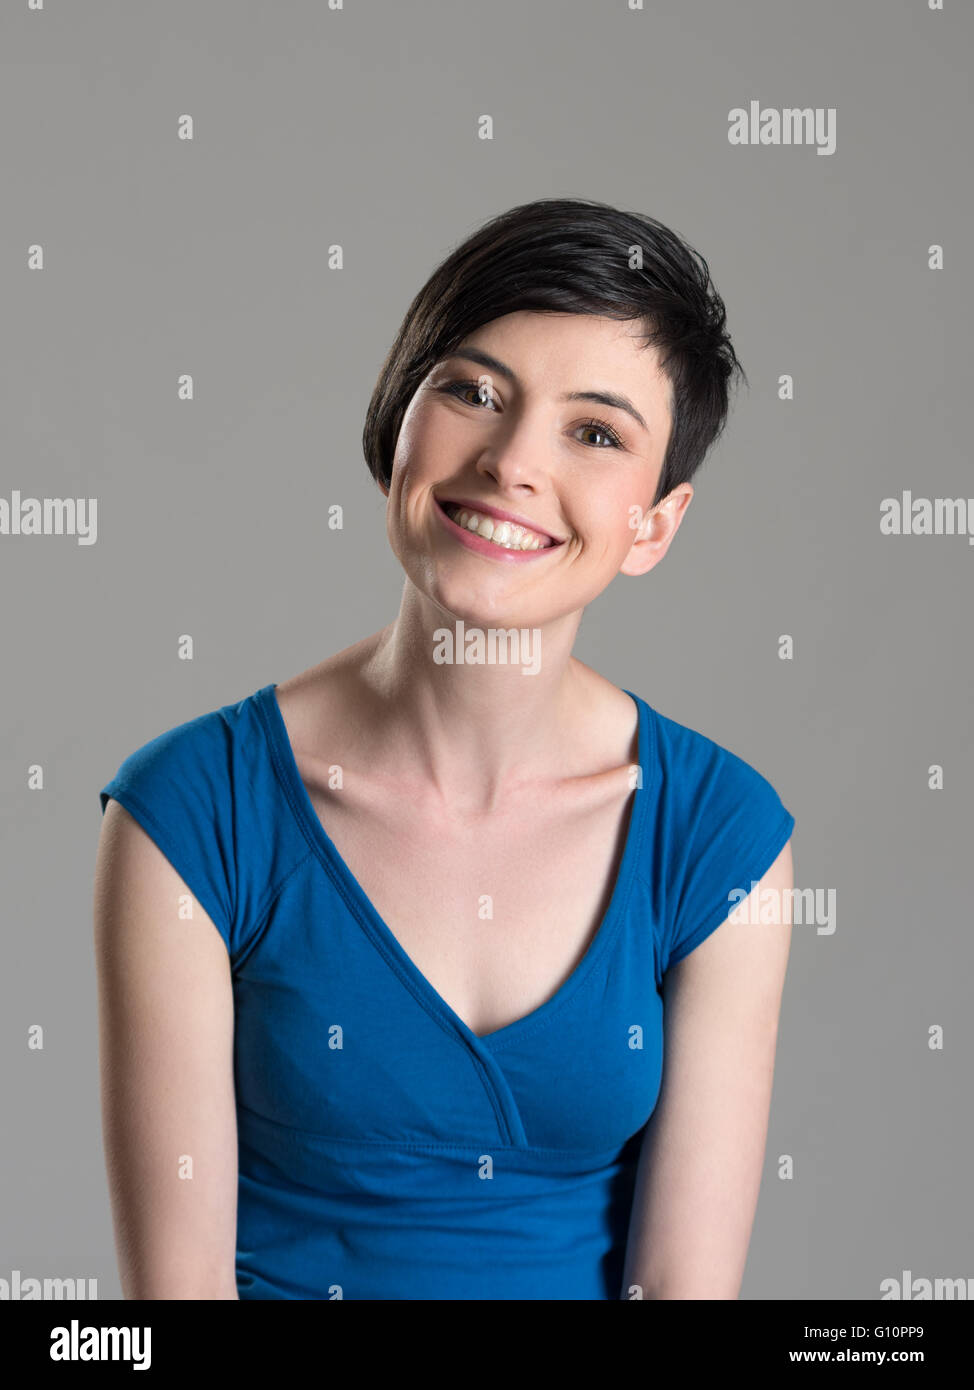 Studio portrait of cute lovely short hair brunette beauty smiling at camera with slightly tilted head over gray background Stock Photo